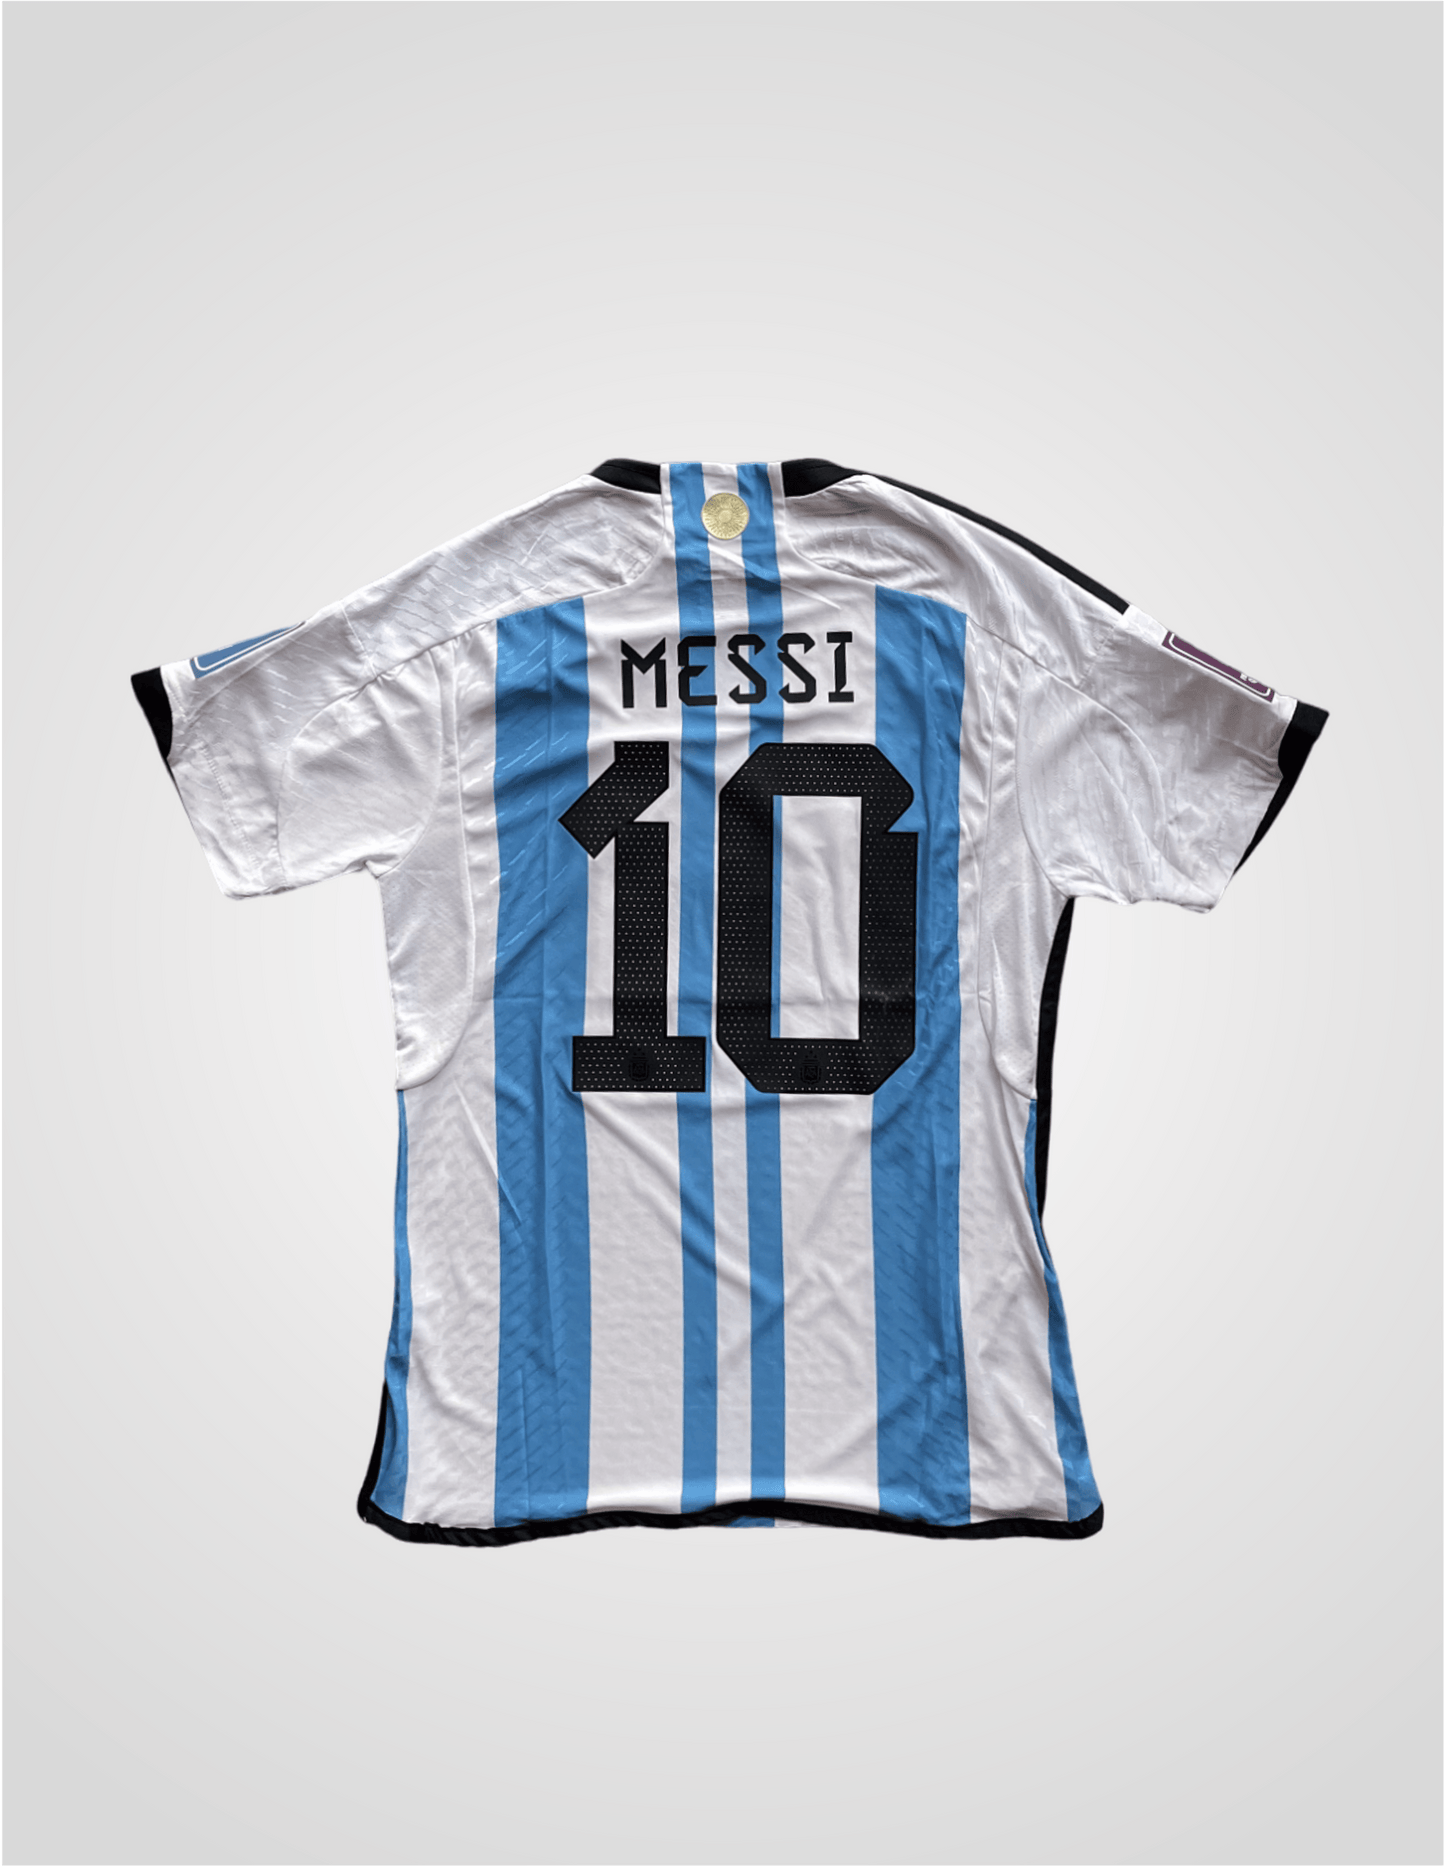 Messi - Argentina World Cup 2022